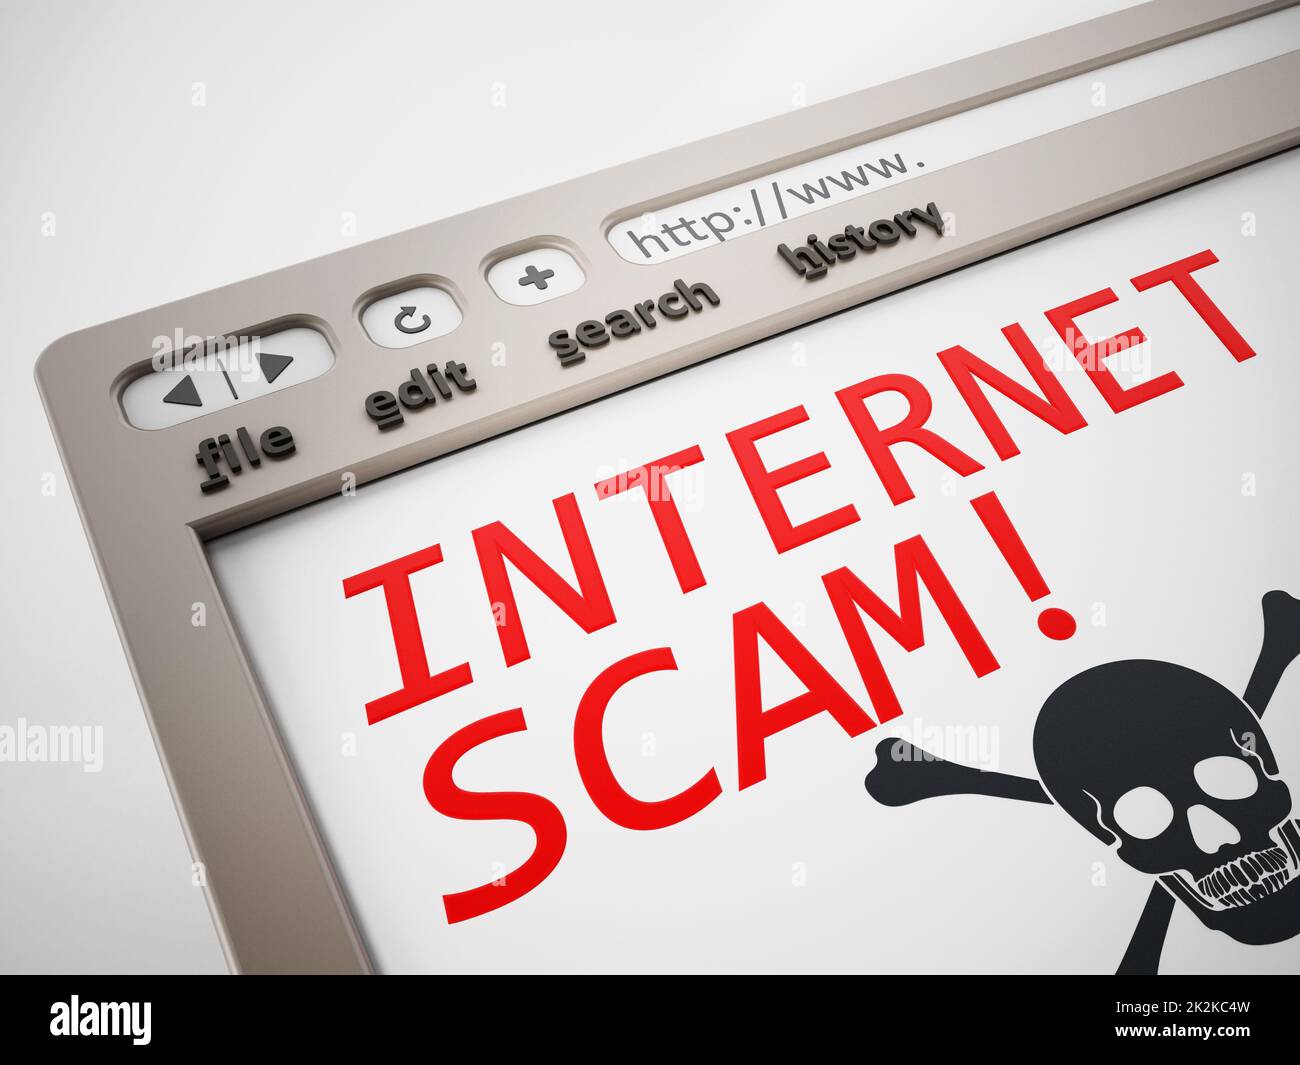 Internet scam browser page with jolly roger. 3D illustration Stock Photo